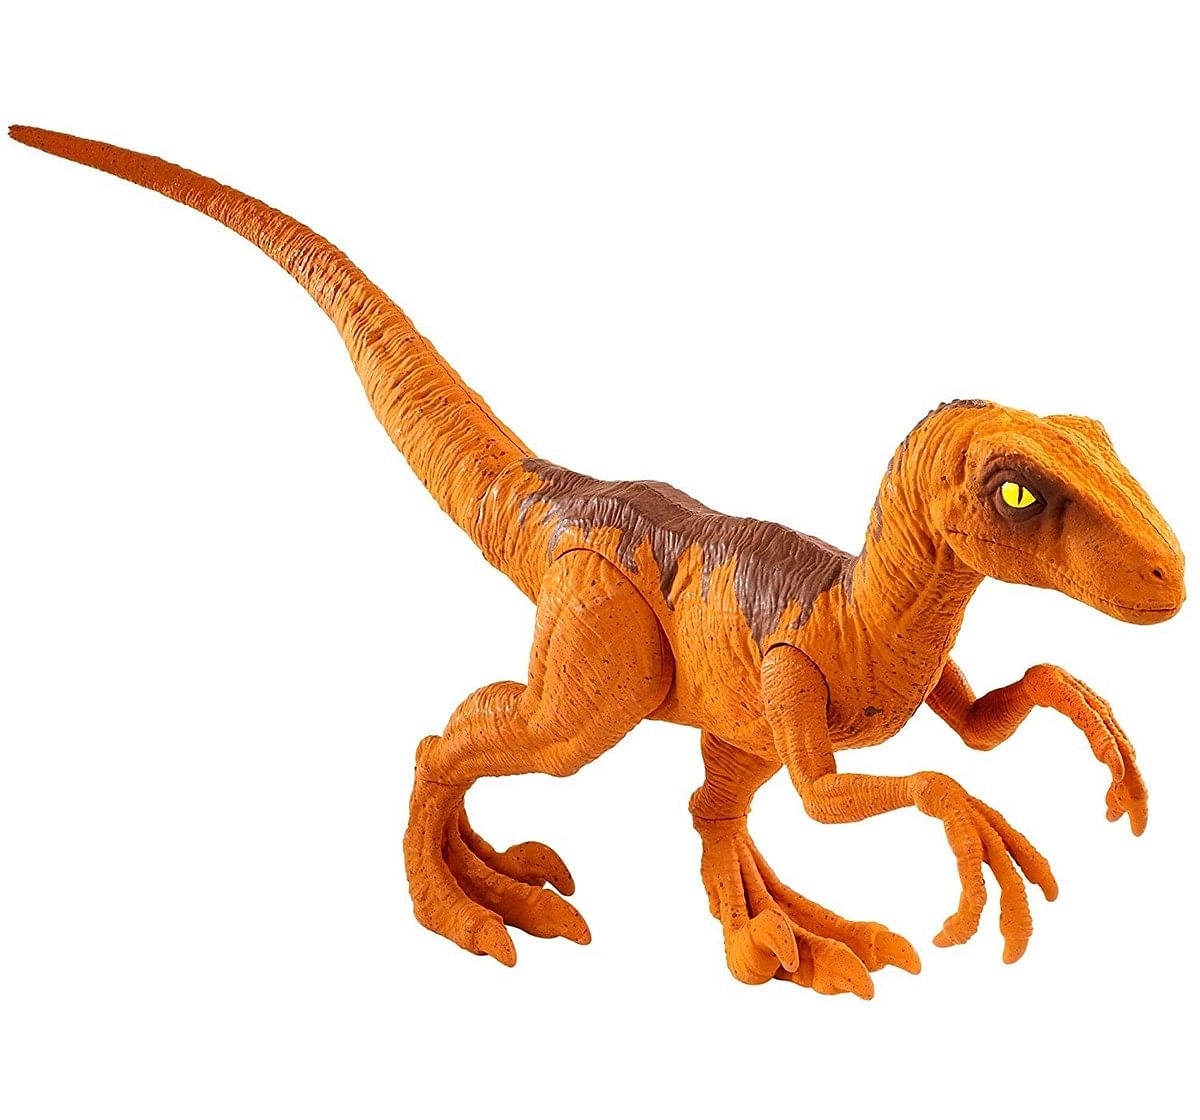 Jurassic World Action Figures Dino Action Figures for Boys age 3Y+, Assorted